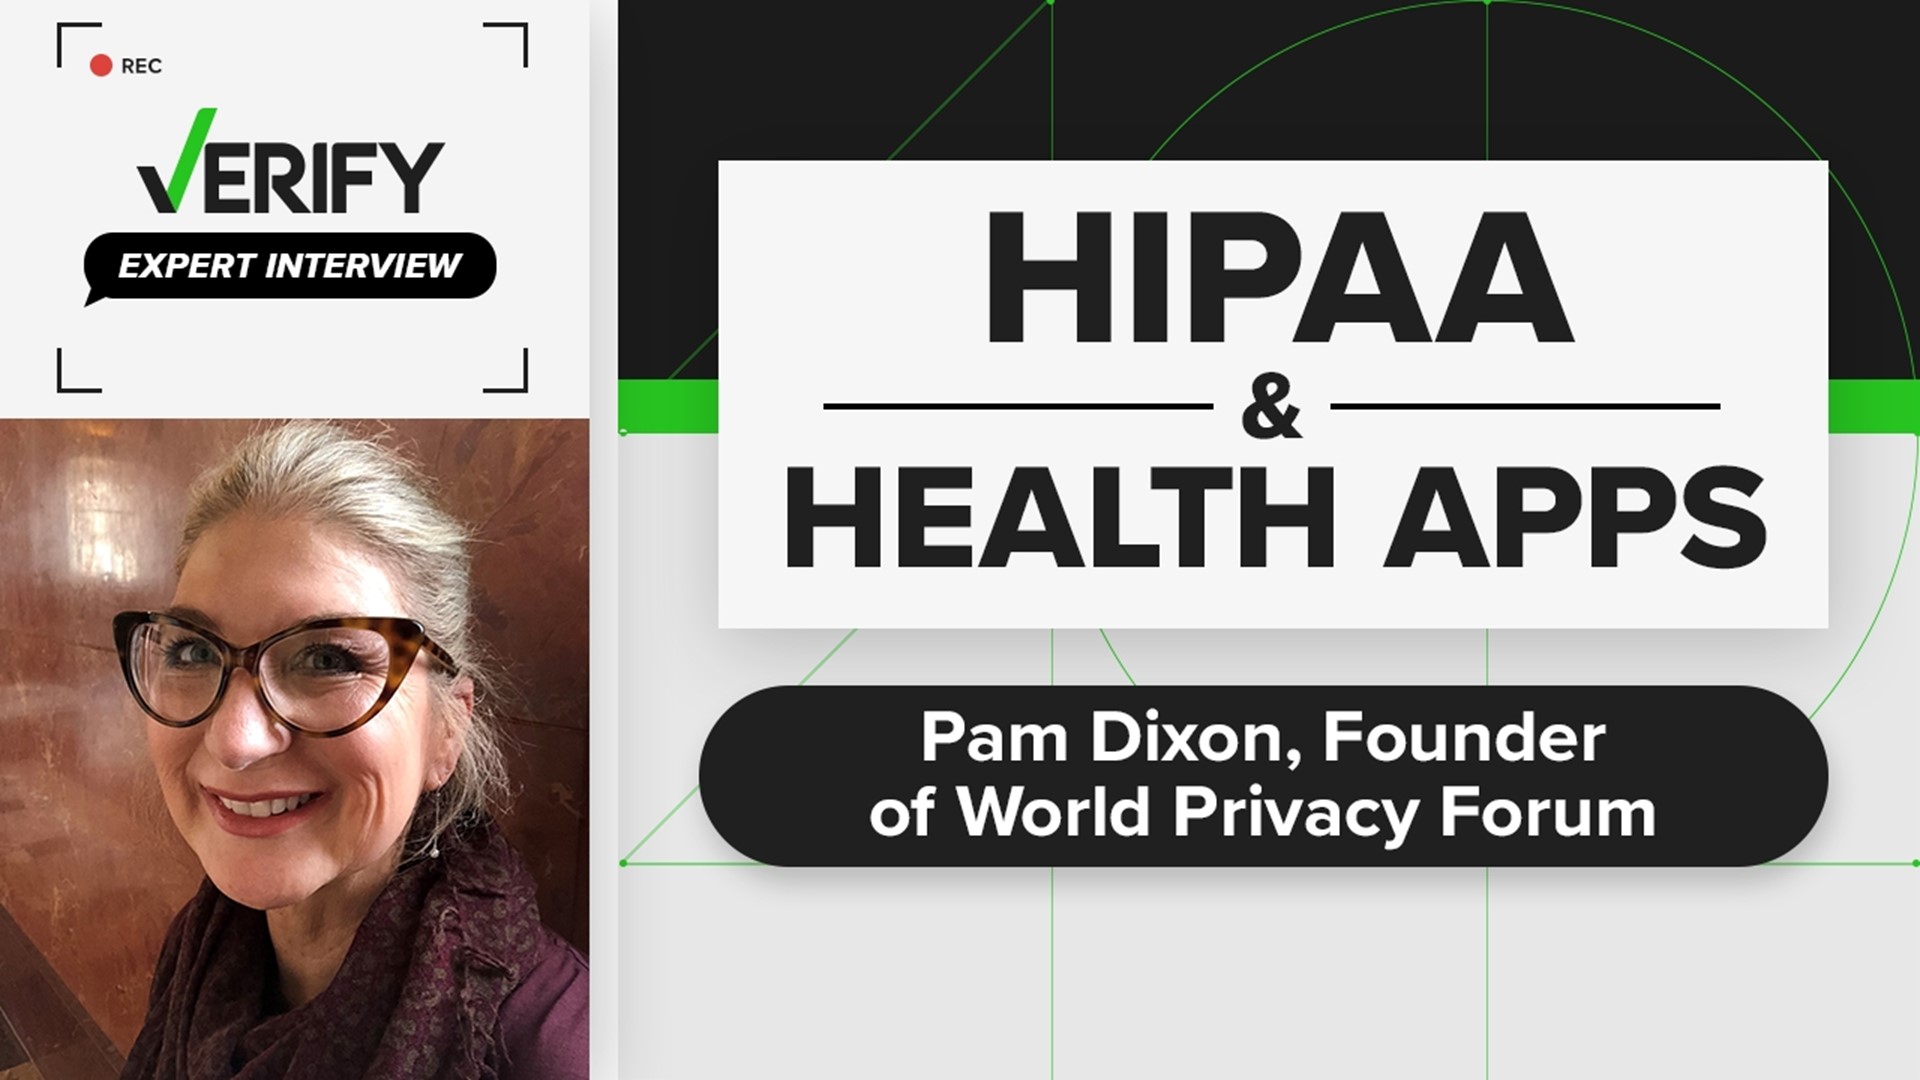 After the leak of a Supreme Court draft opinion on Roe v. Wade many people are wondering if health data from period-tracking apps are covered under HIPAA.